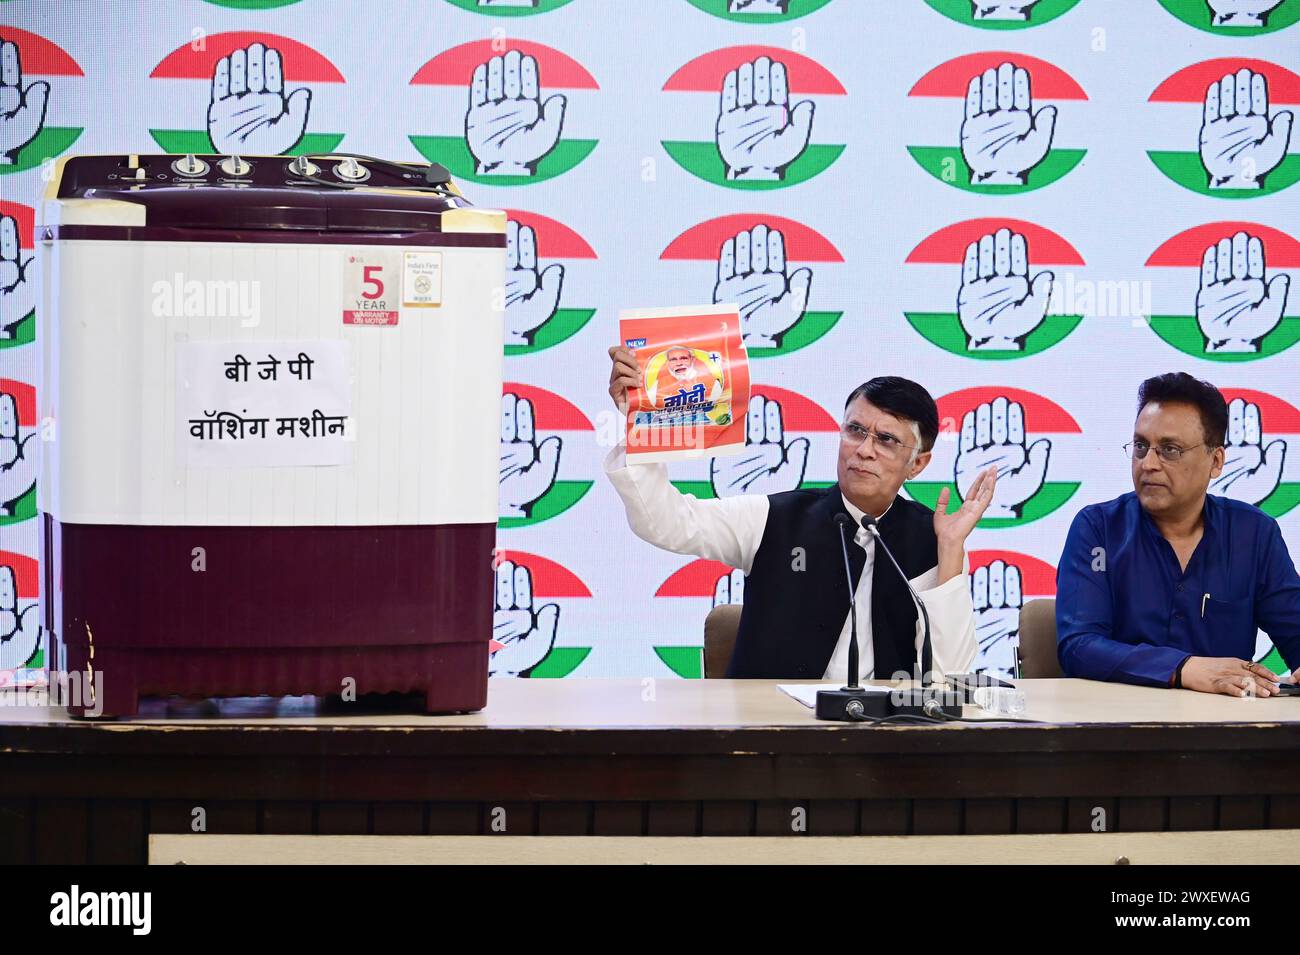 NEW DELHI, INDIA - MARCH 30: Congress leader Pawan Khera showing ‘Modi Washing Powder' and ‘Washing Machine' who cleans all corrupt Politicians and wash all charges levels against them if they Join BJP, during a press briefing at AICC, on March 30, 2024 in New Delhi, India. The Congress raised the issue of leaders, against whom there have been corruption charges, joining or aligning with the BJP only to see “the cases against them being closed”, an allegation often leveled by opposition parties. (Photo by Vipin Kumar/Hindustan Times/Sipa USA ) Stock Photo